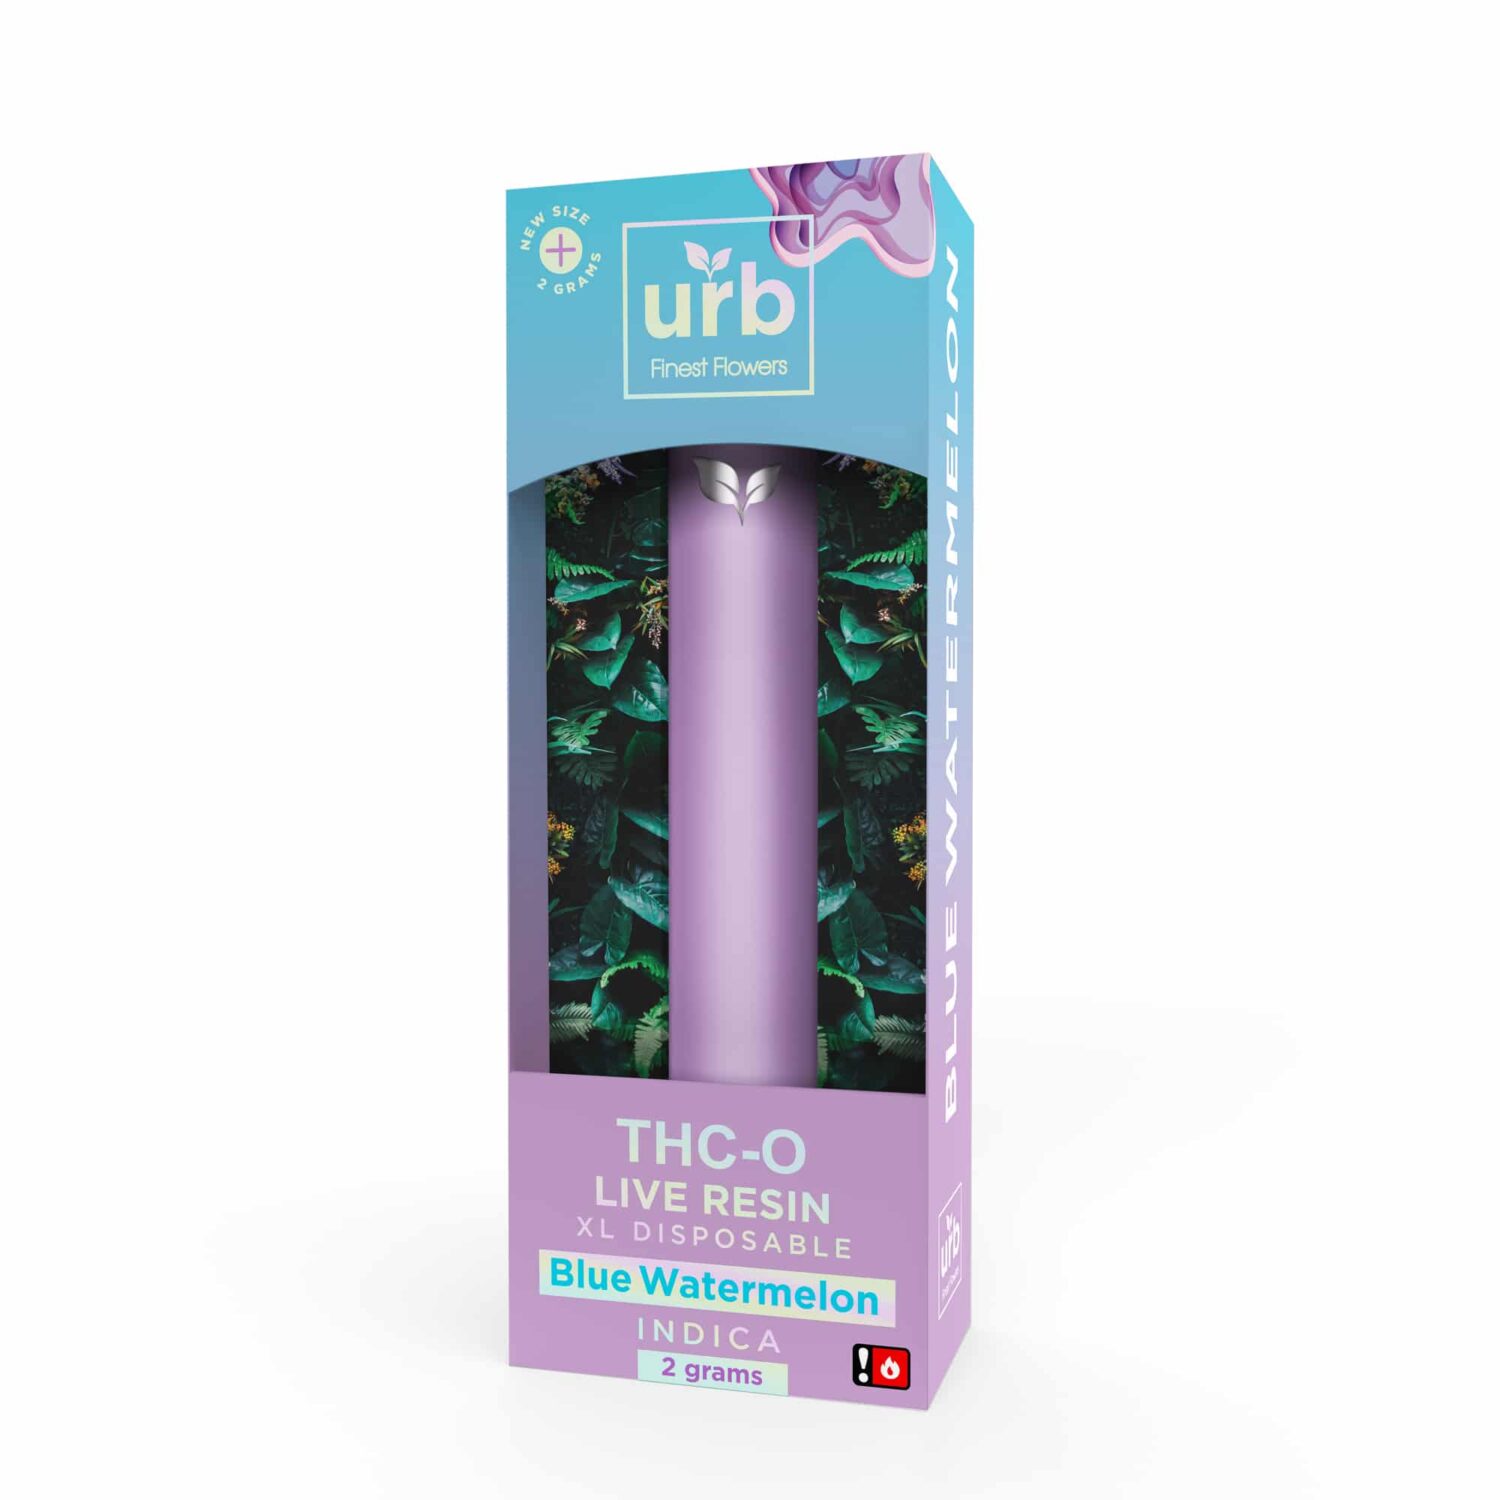 URB-Live-Resin-THC-O-Disposable-2g-Blue-Watermelon-scaled-1.jpeg